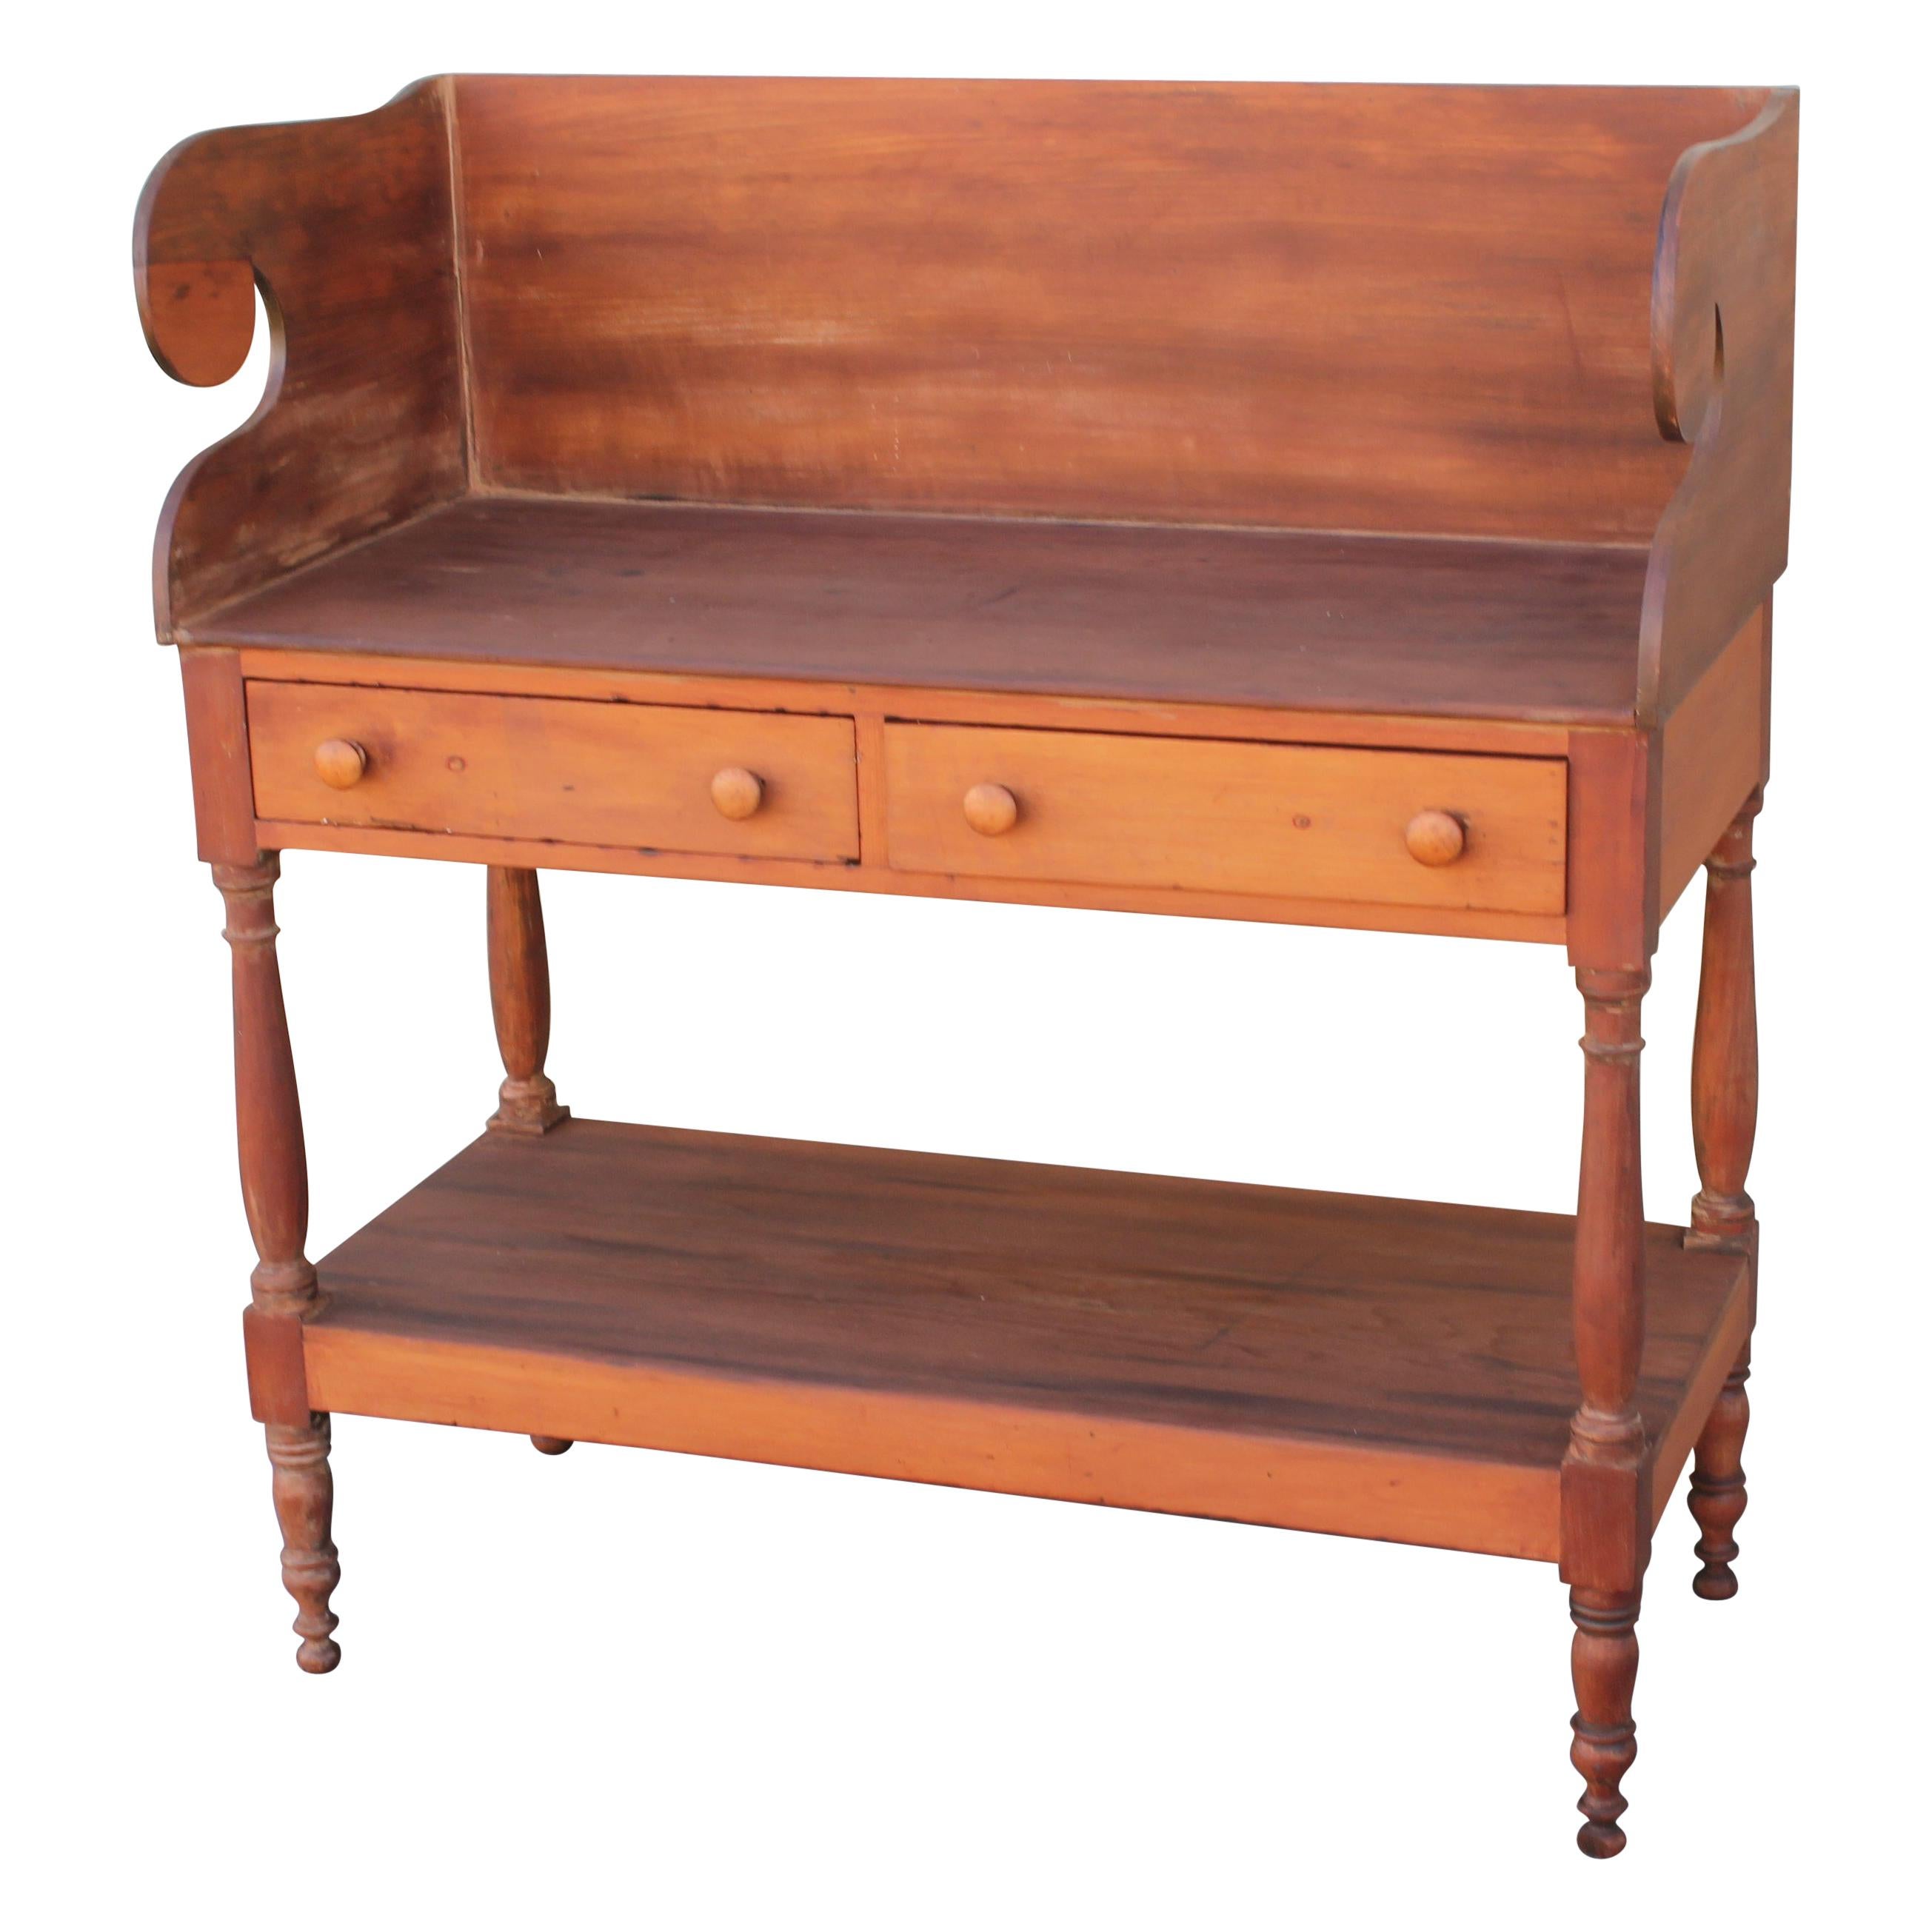 19th Century Console Table with Drawers from Pennsylvania